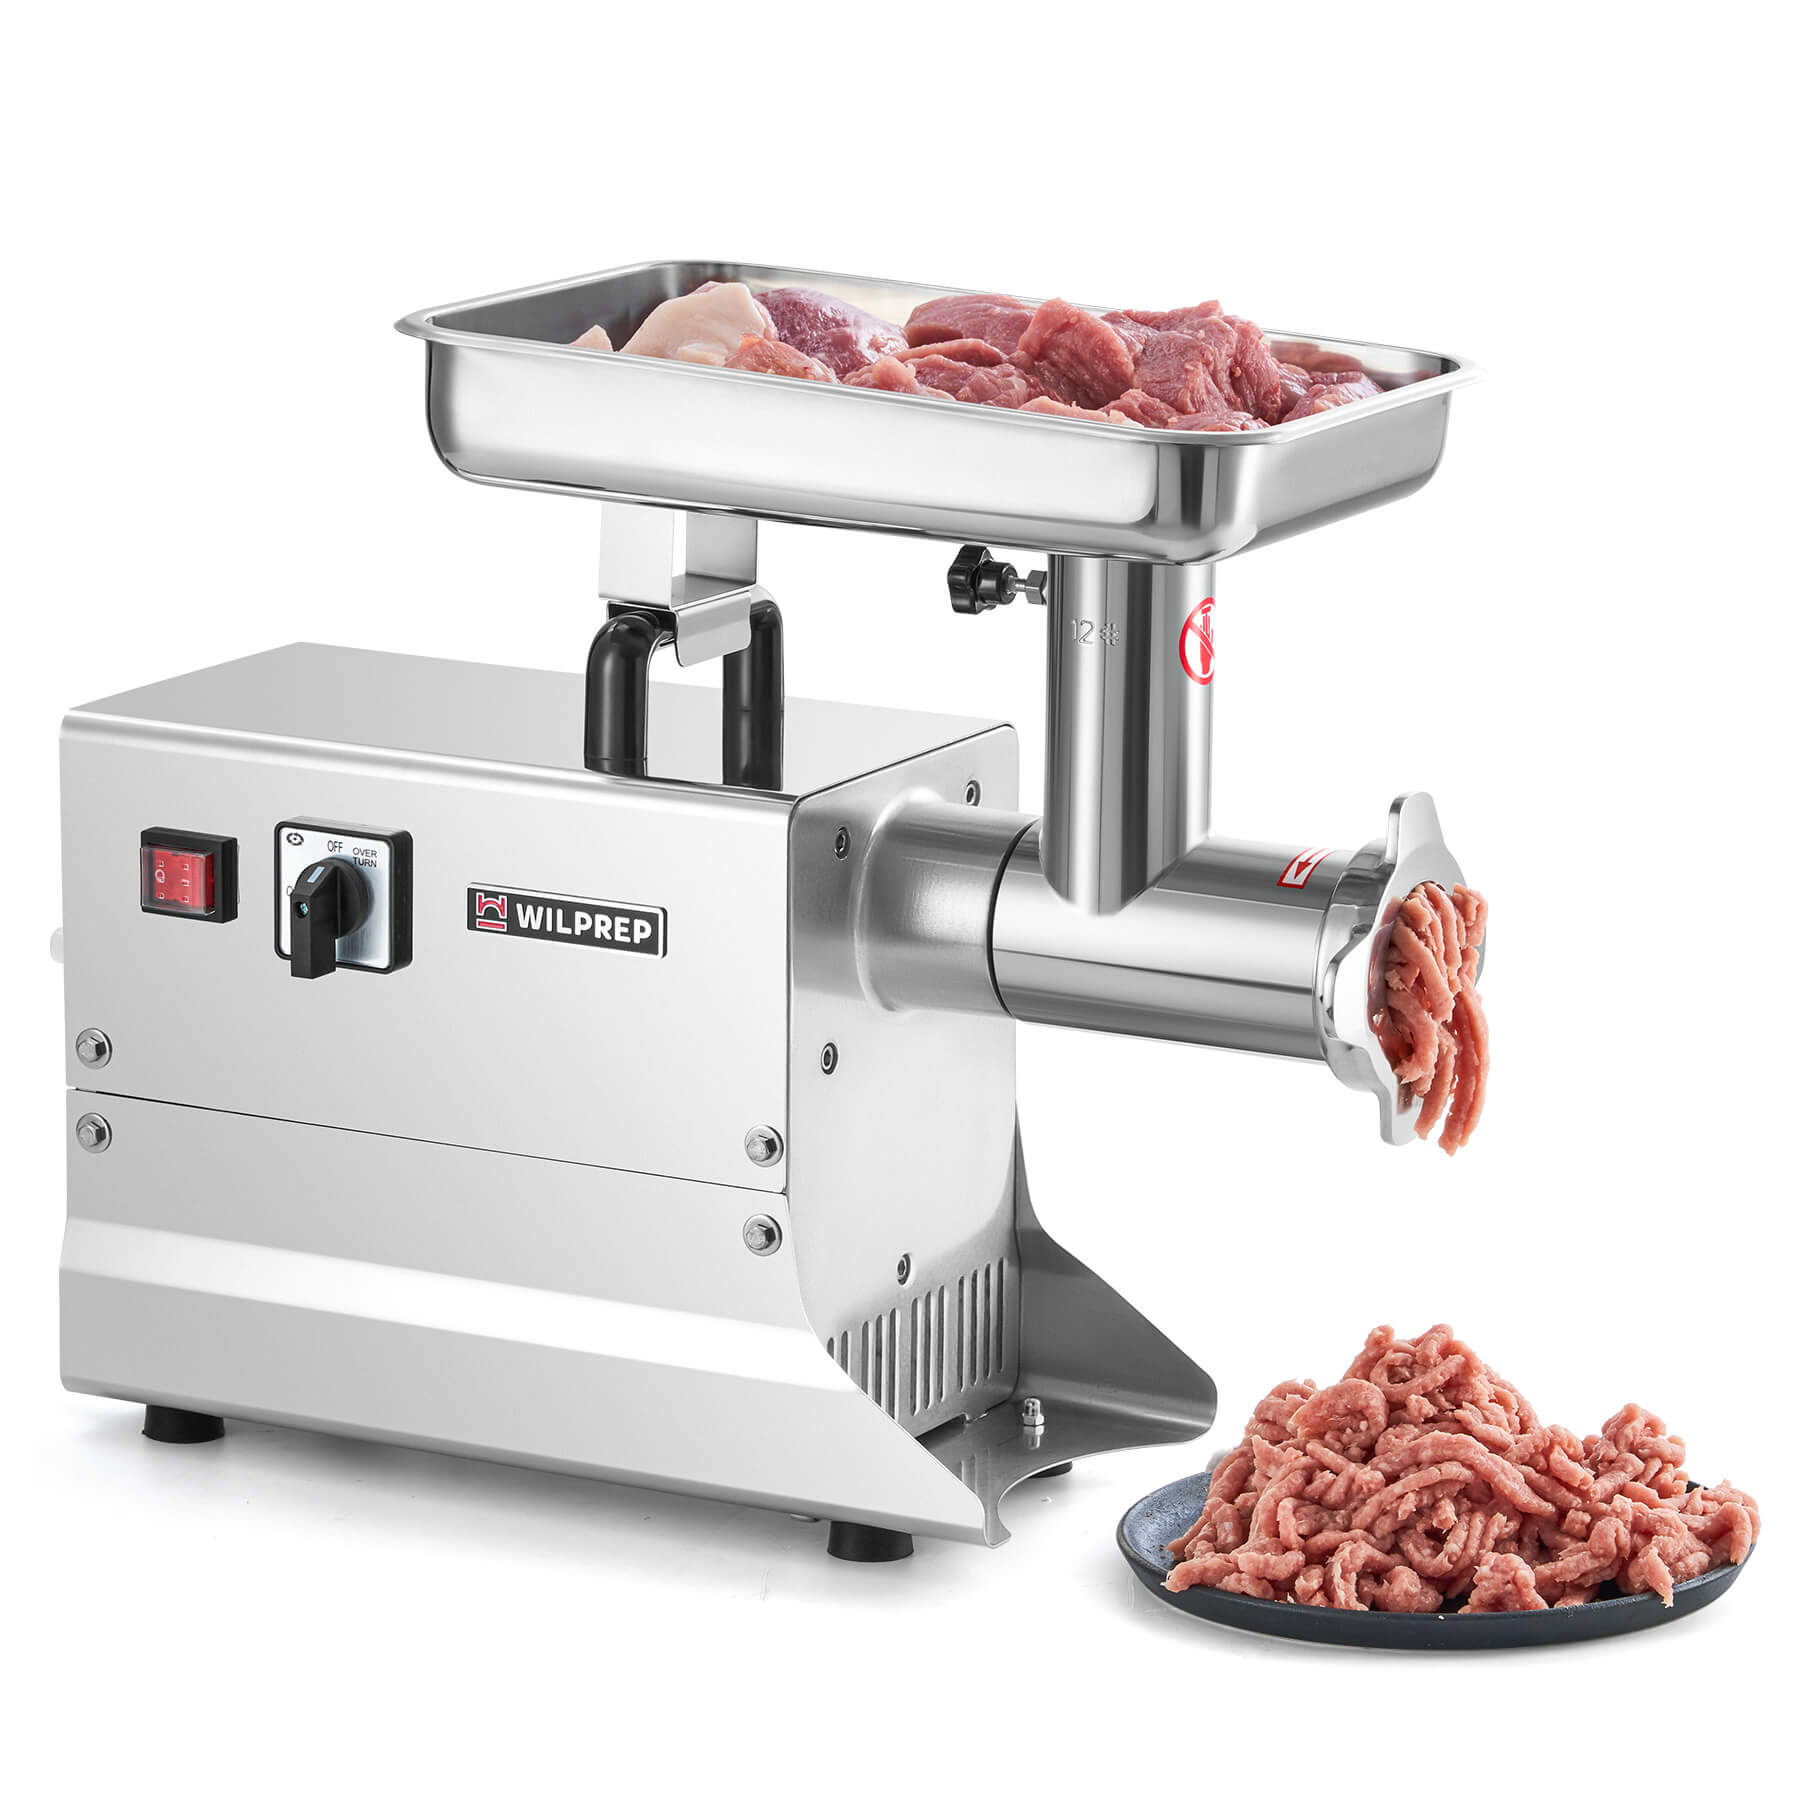 550W Electric Meat Grinder with Reverse Function ETL Approved-110V,3/4hp